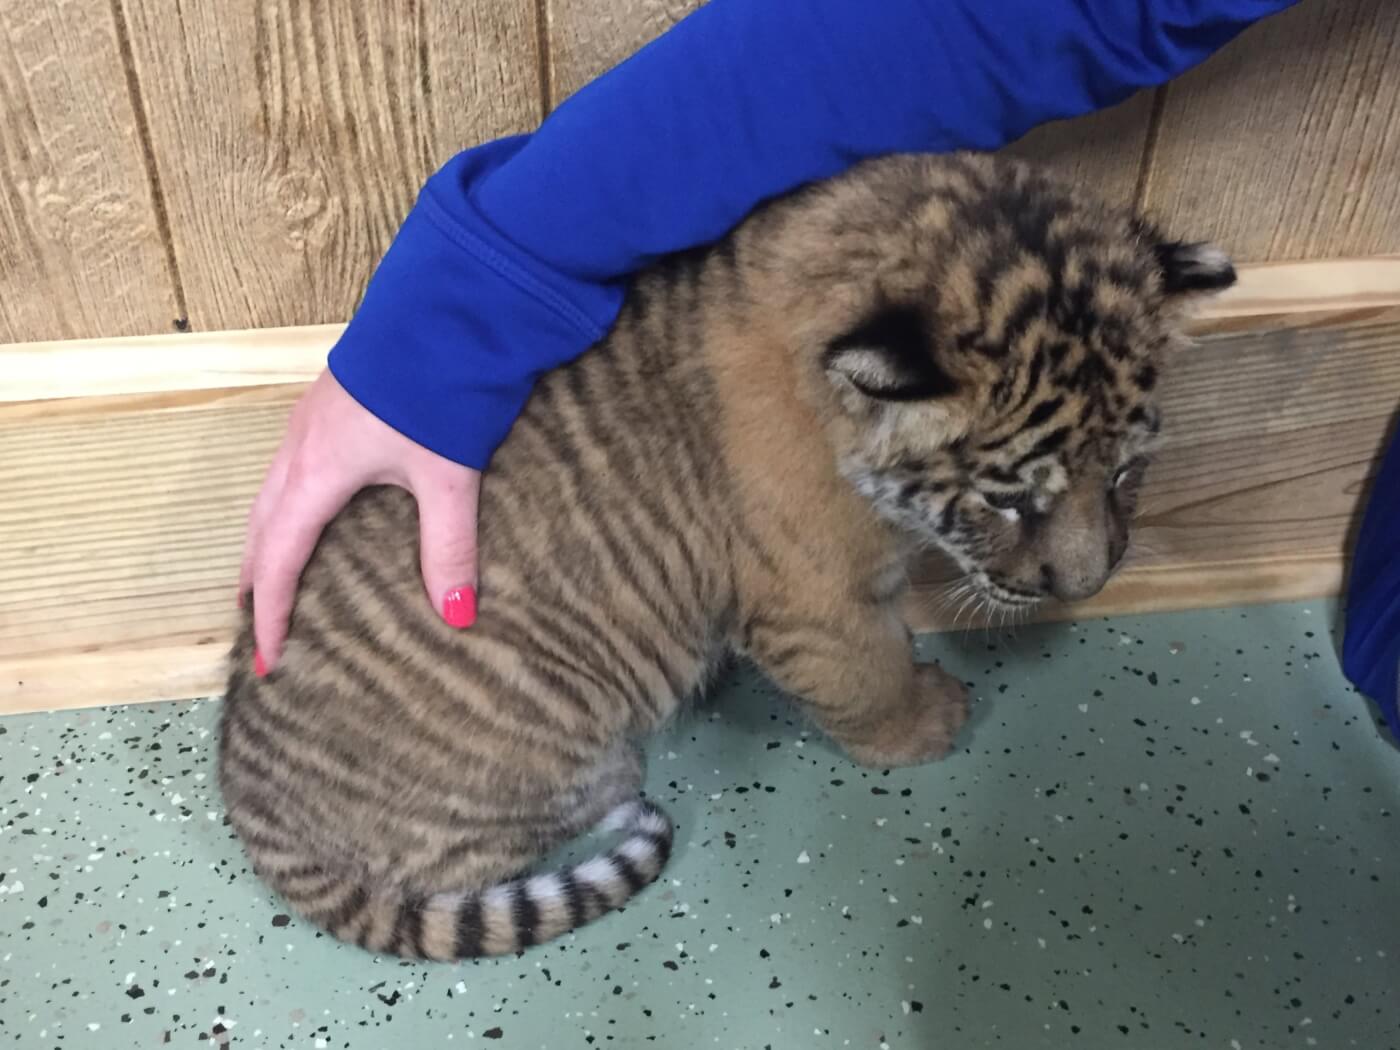 tiger cub petting now illegal after biden signs Big Cat Public Safety Act into law